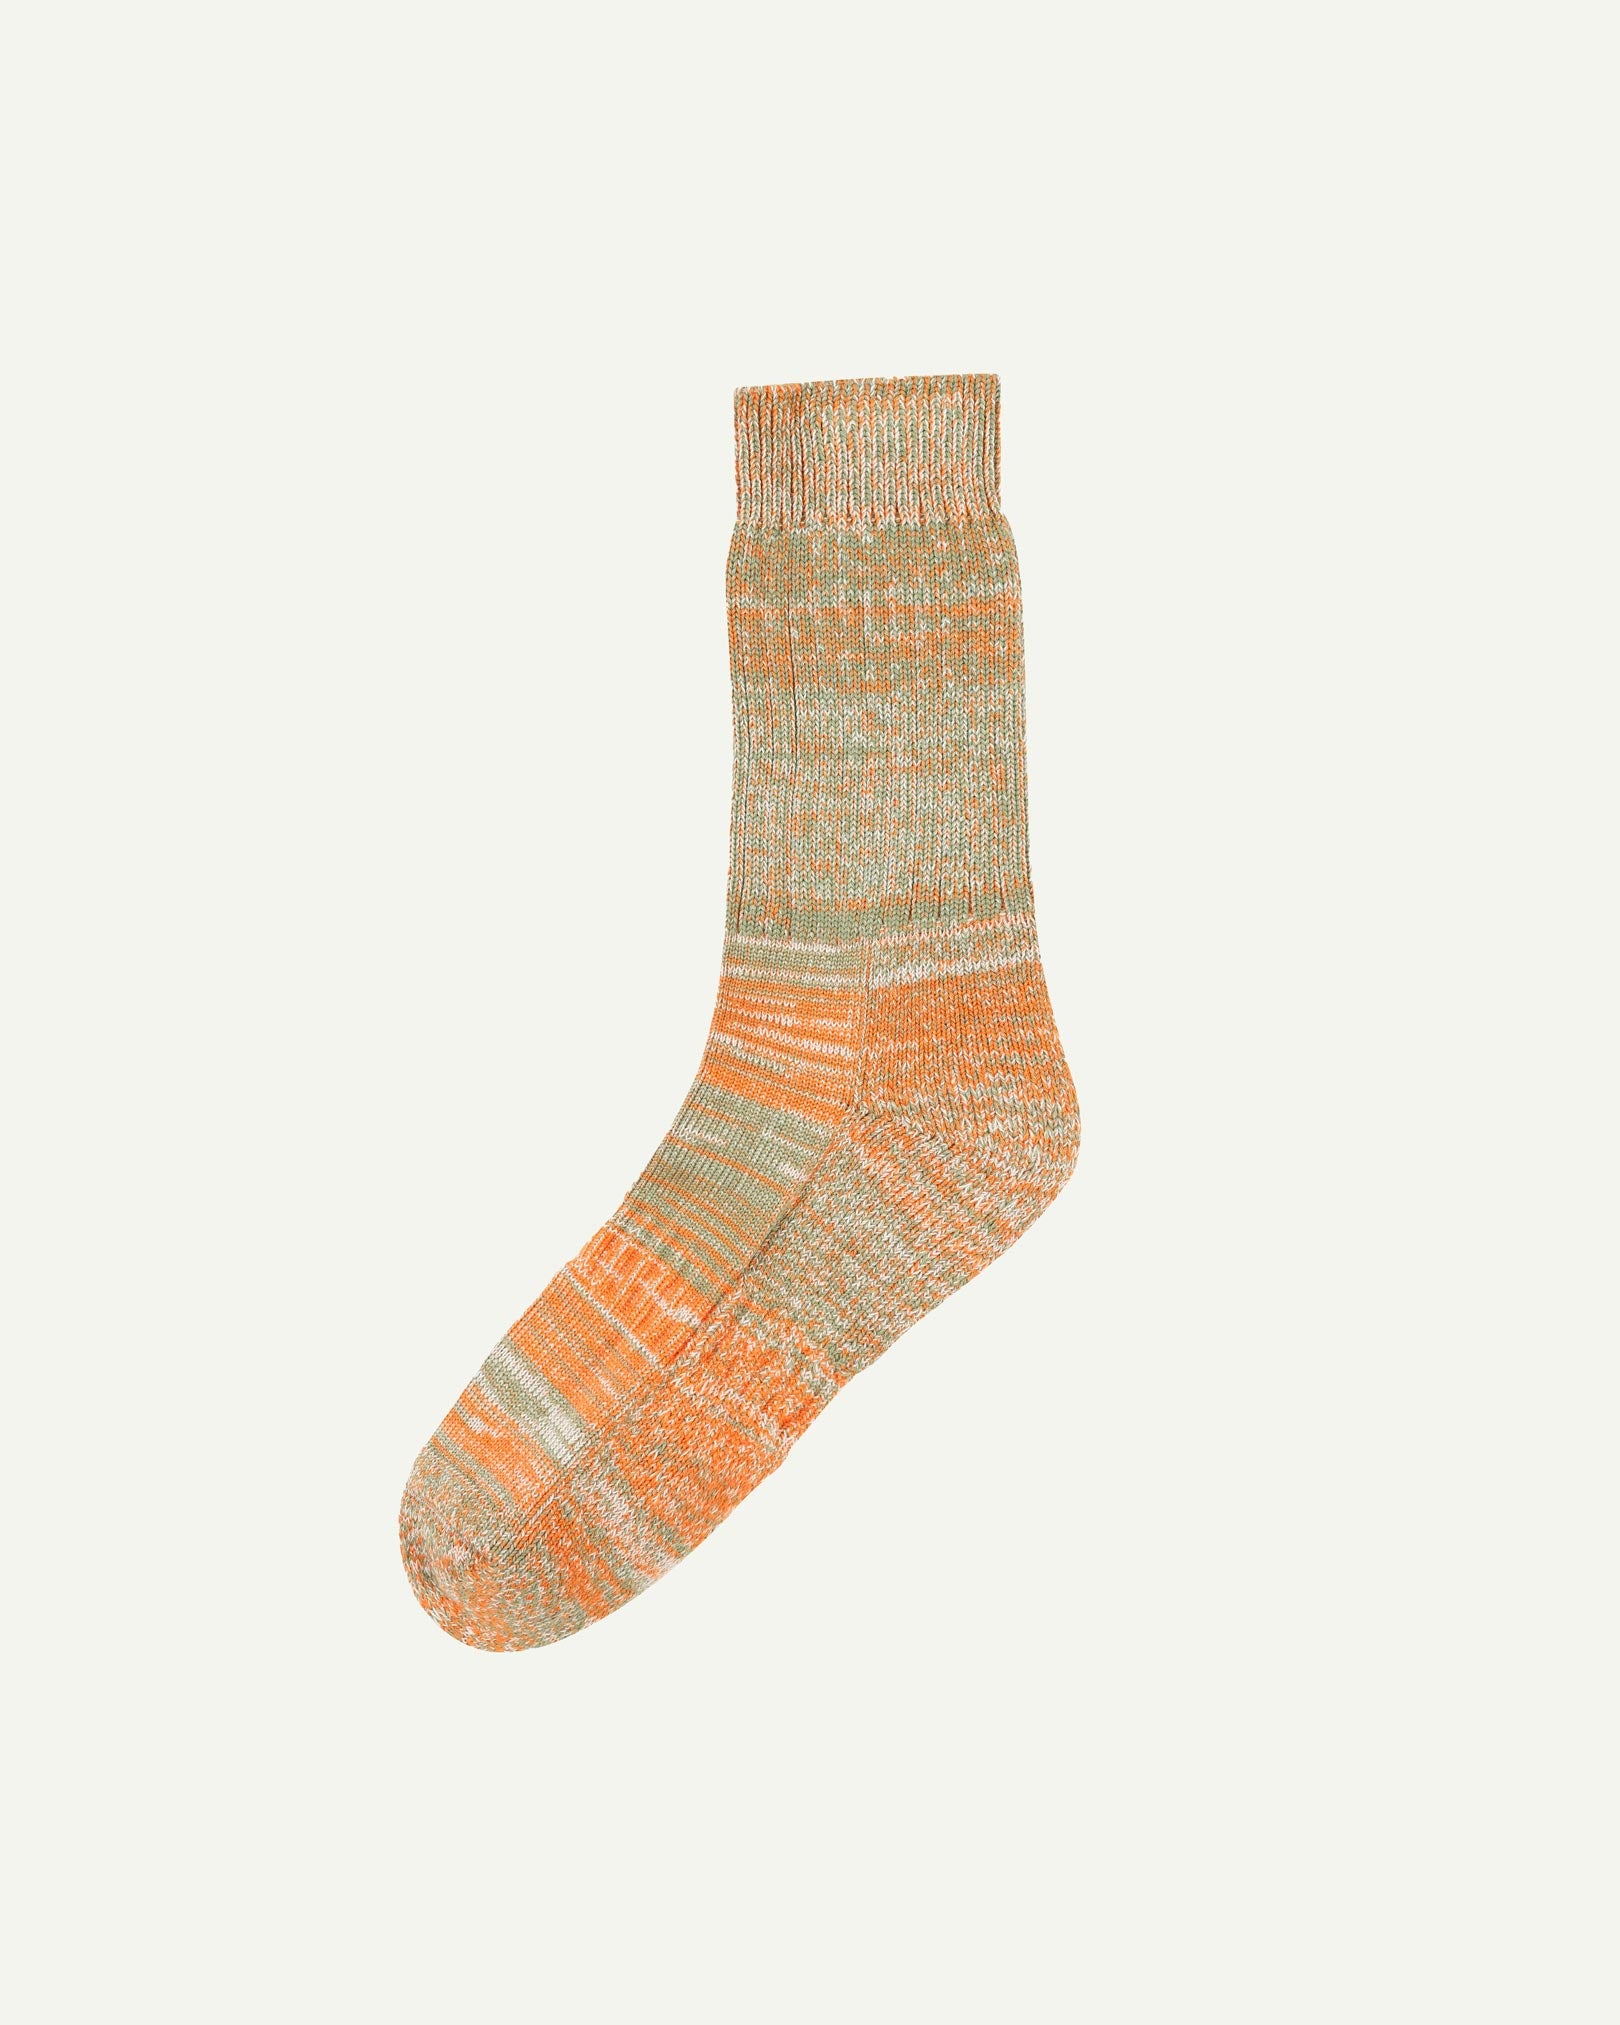 Flat view of Uskees 4006 army green mix organic cotton sock, showing bands of orange, army green and beige.